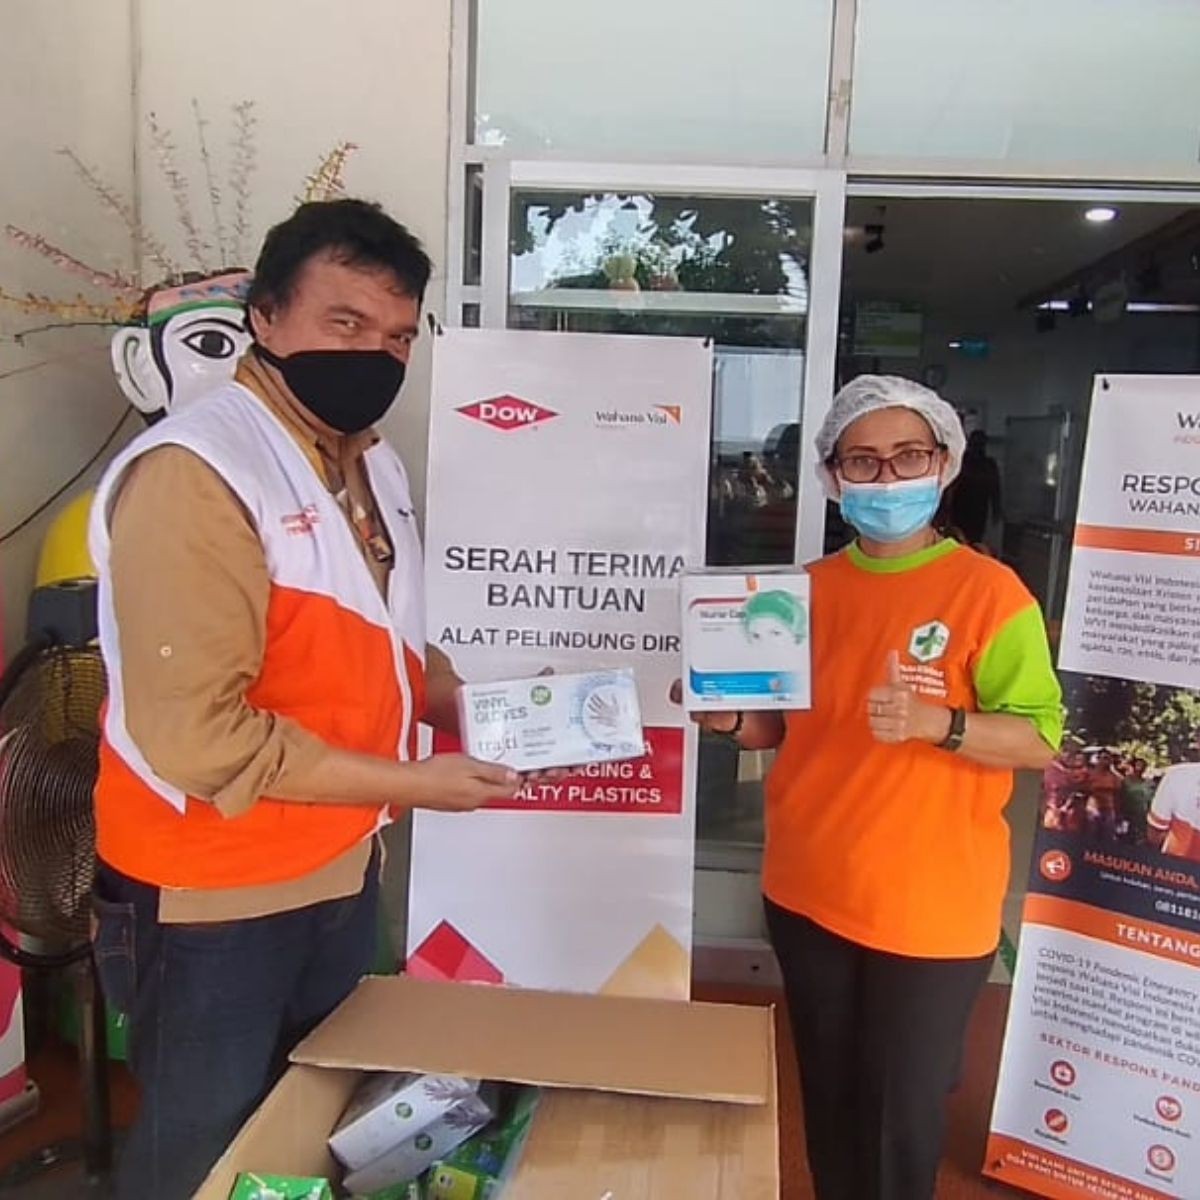 Dow Donates PPE and 10,000 Masks to Support Health Workers During the Pandemic